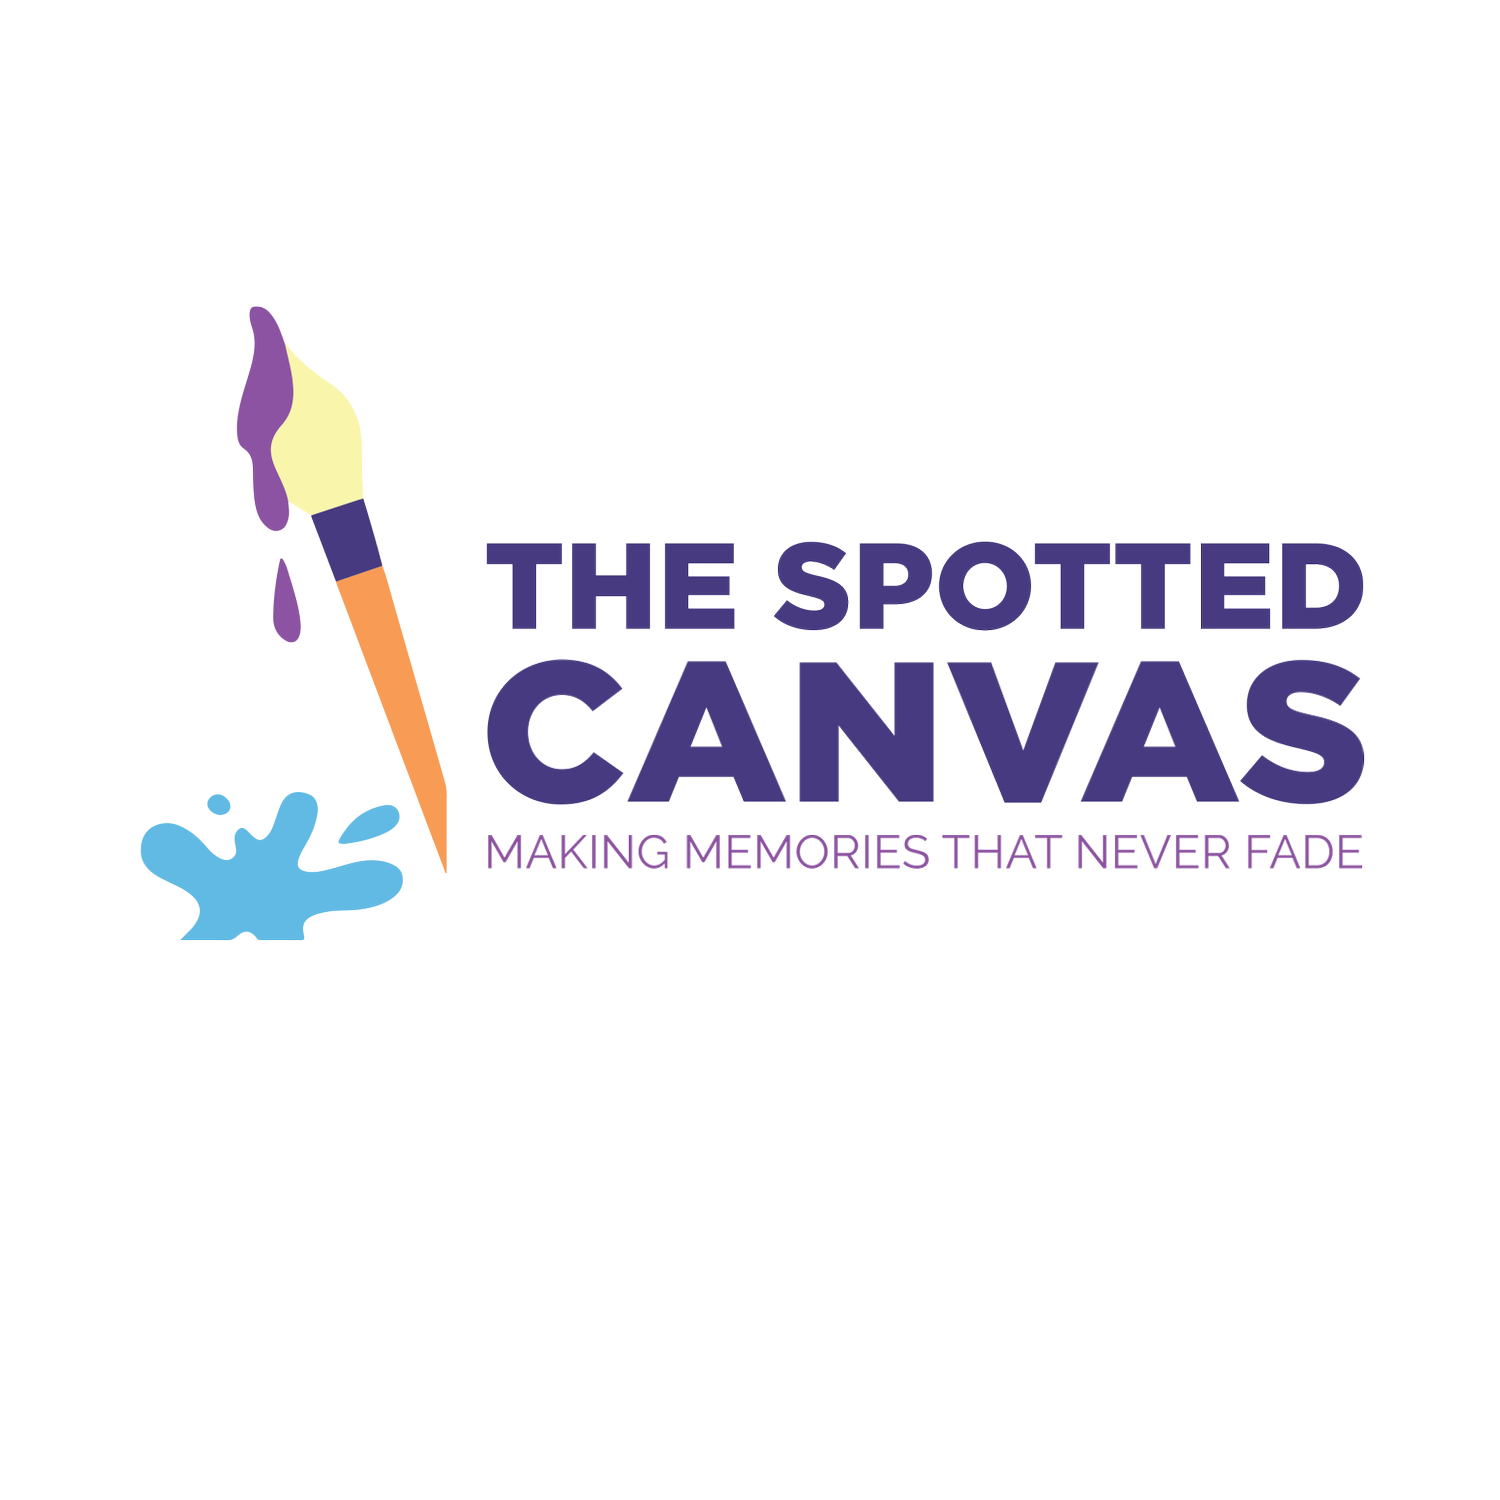 The Spotted Canvas